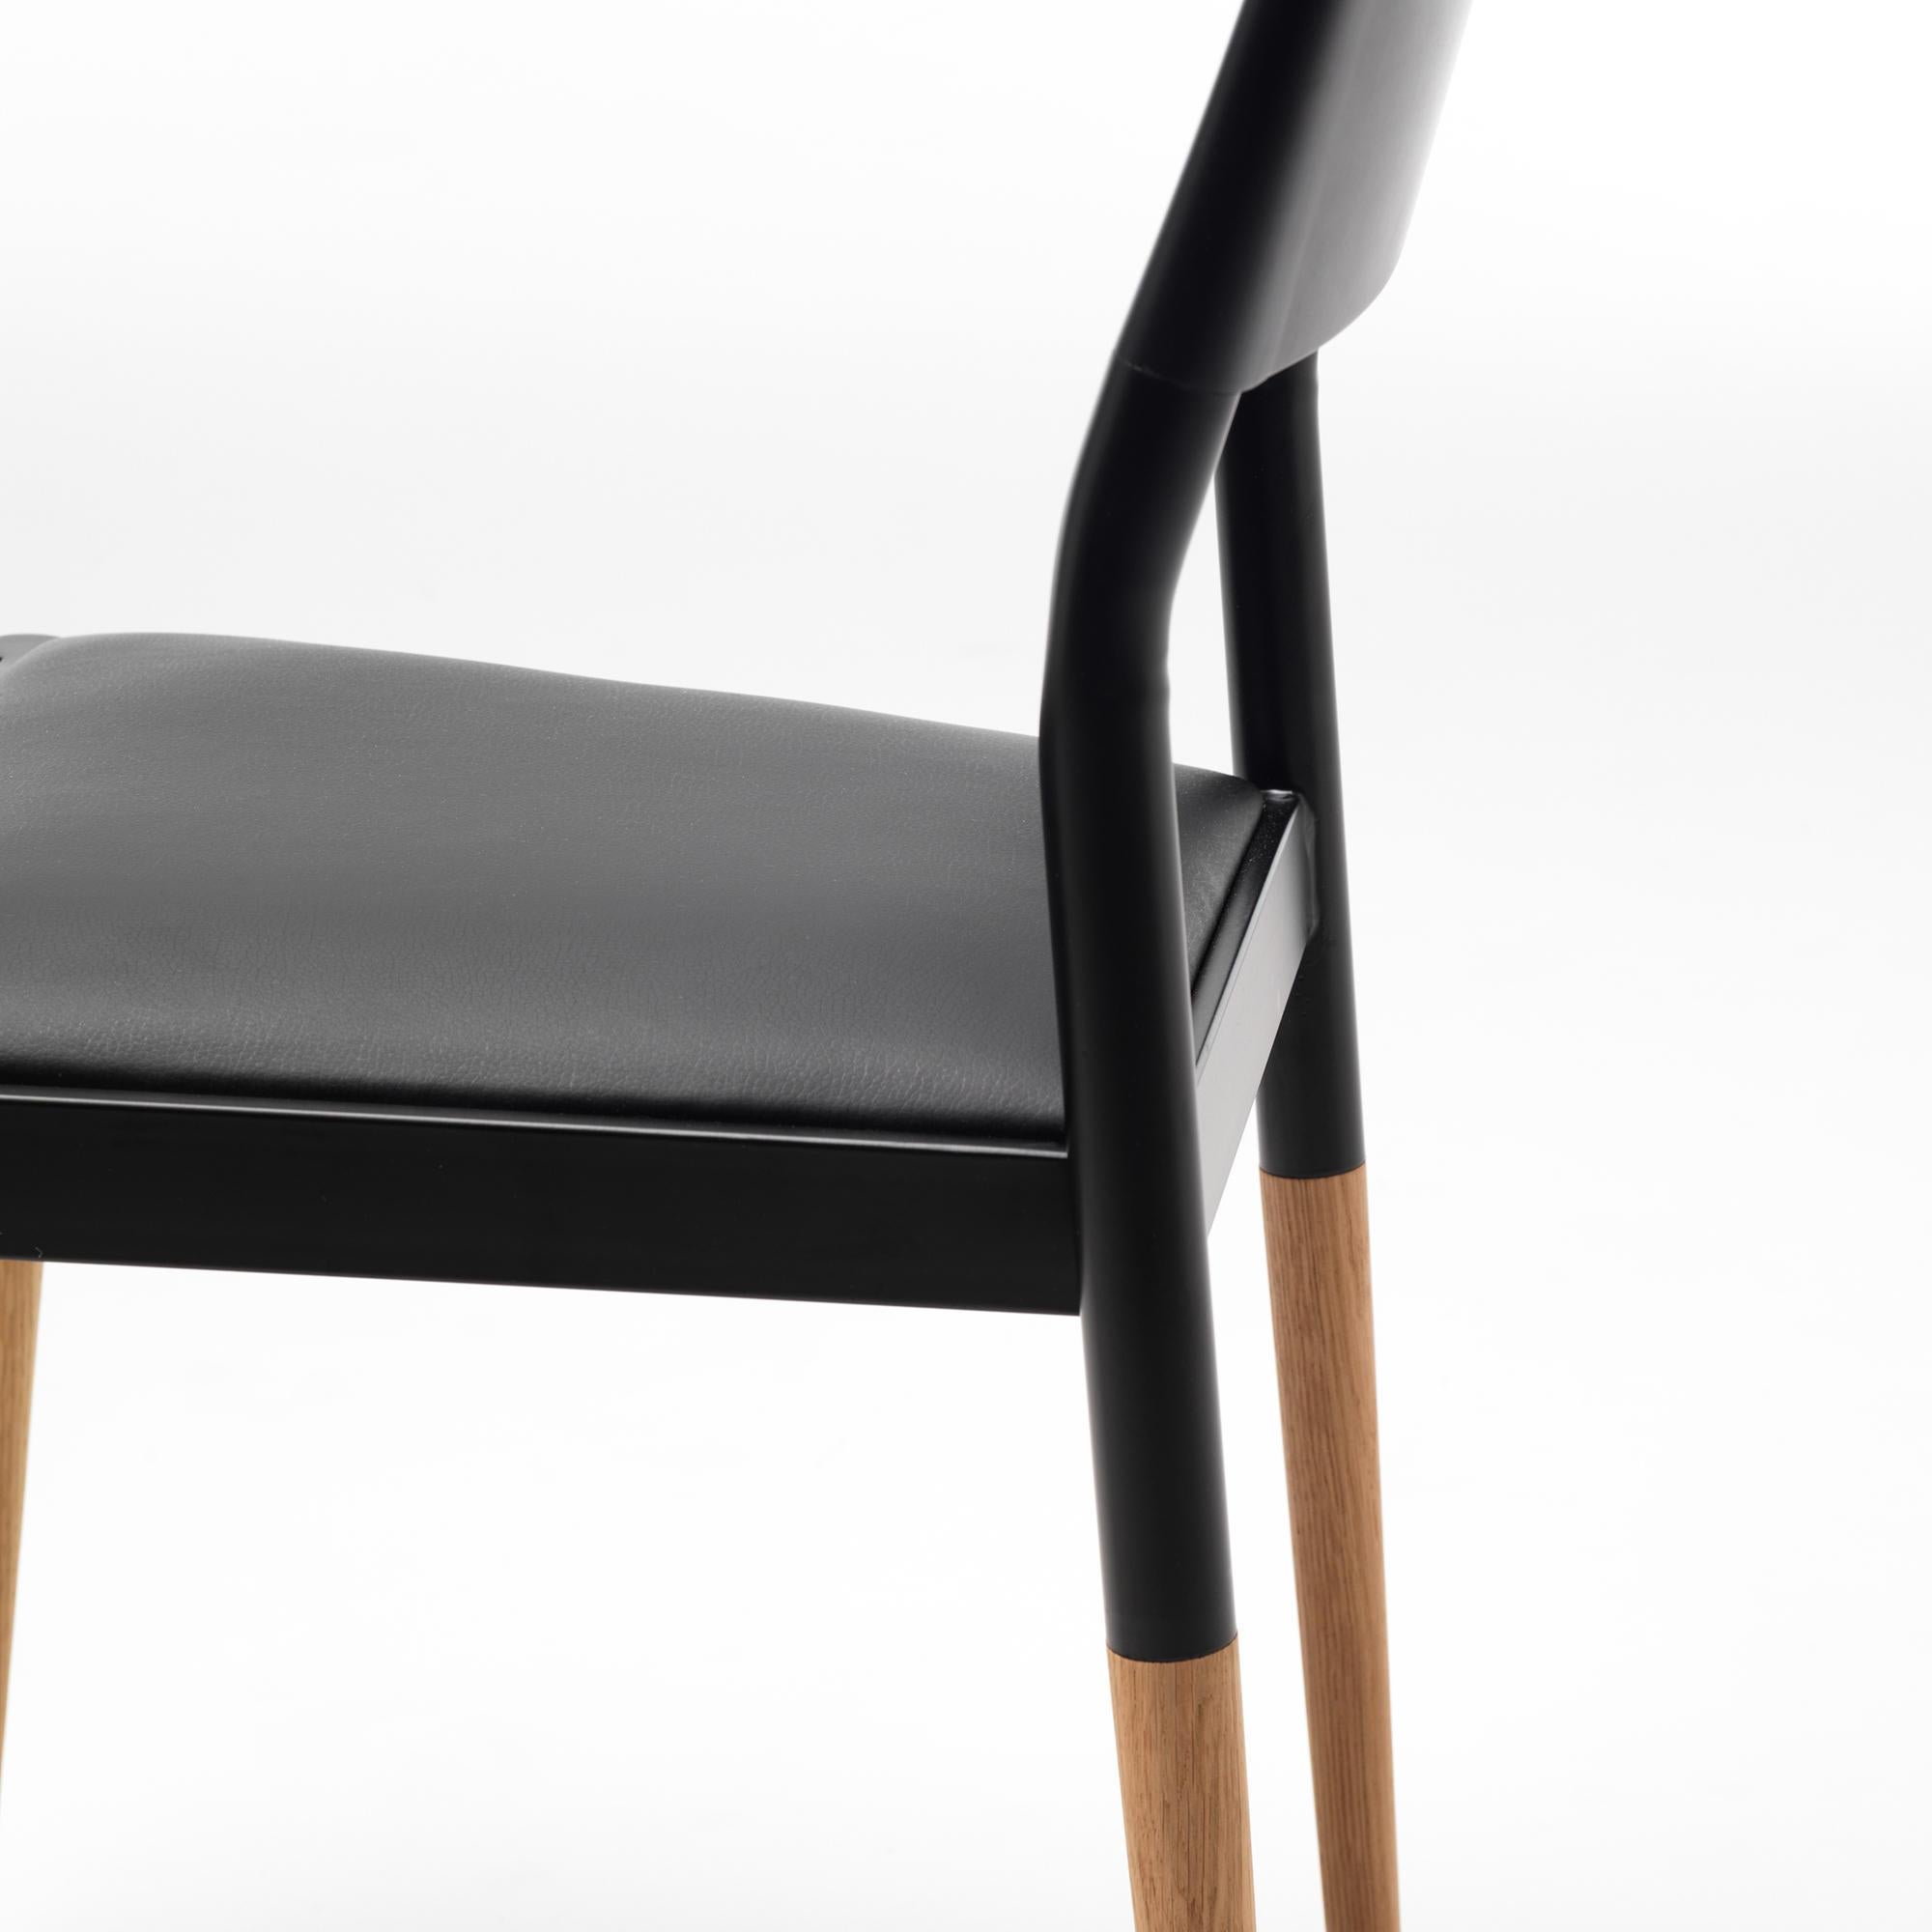 21st Century Modern Steel And Wood Chair With Leather Upholstered Seat In New Condition For Sale In Milan, IT